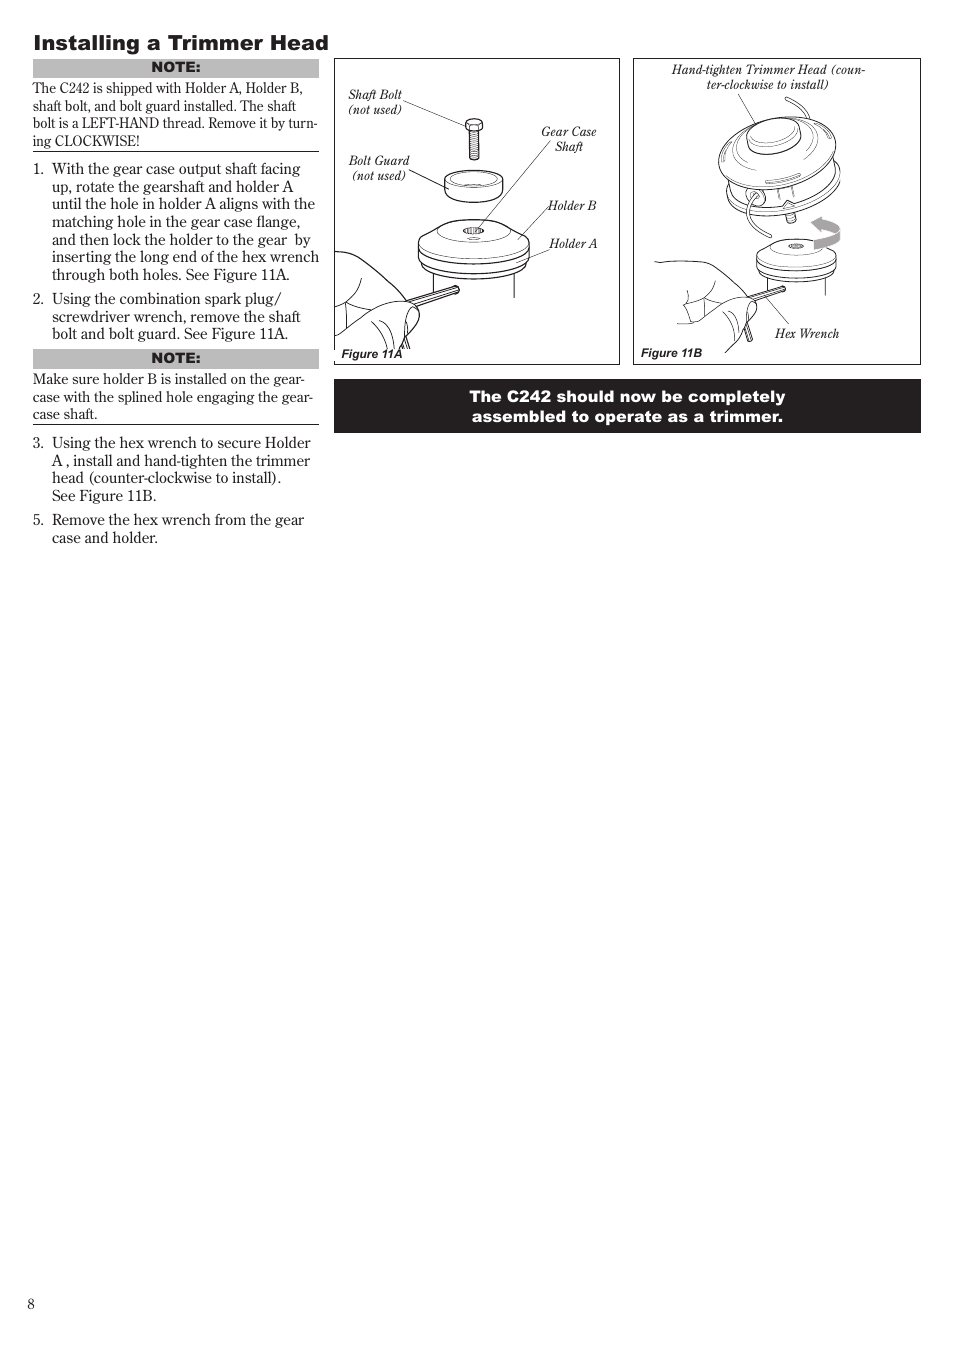 Installing a trimmer head | Shindaiwa 81644 User Manual | Page 8 / 40